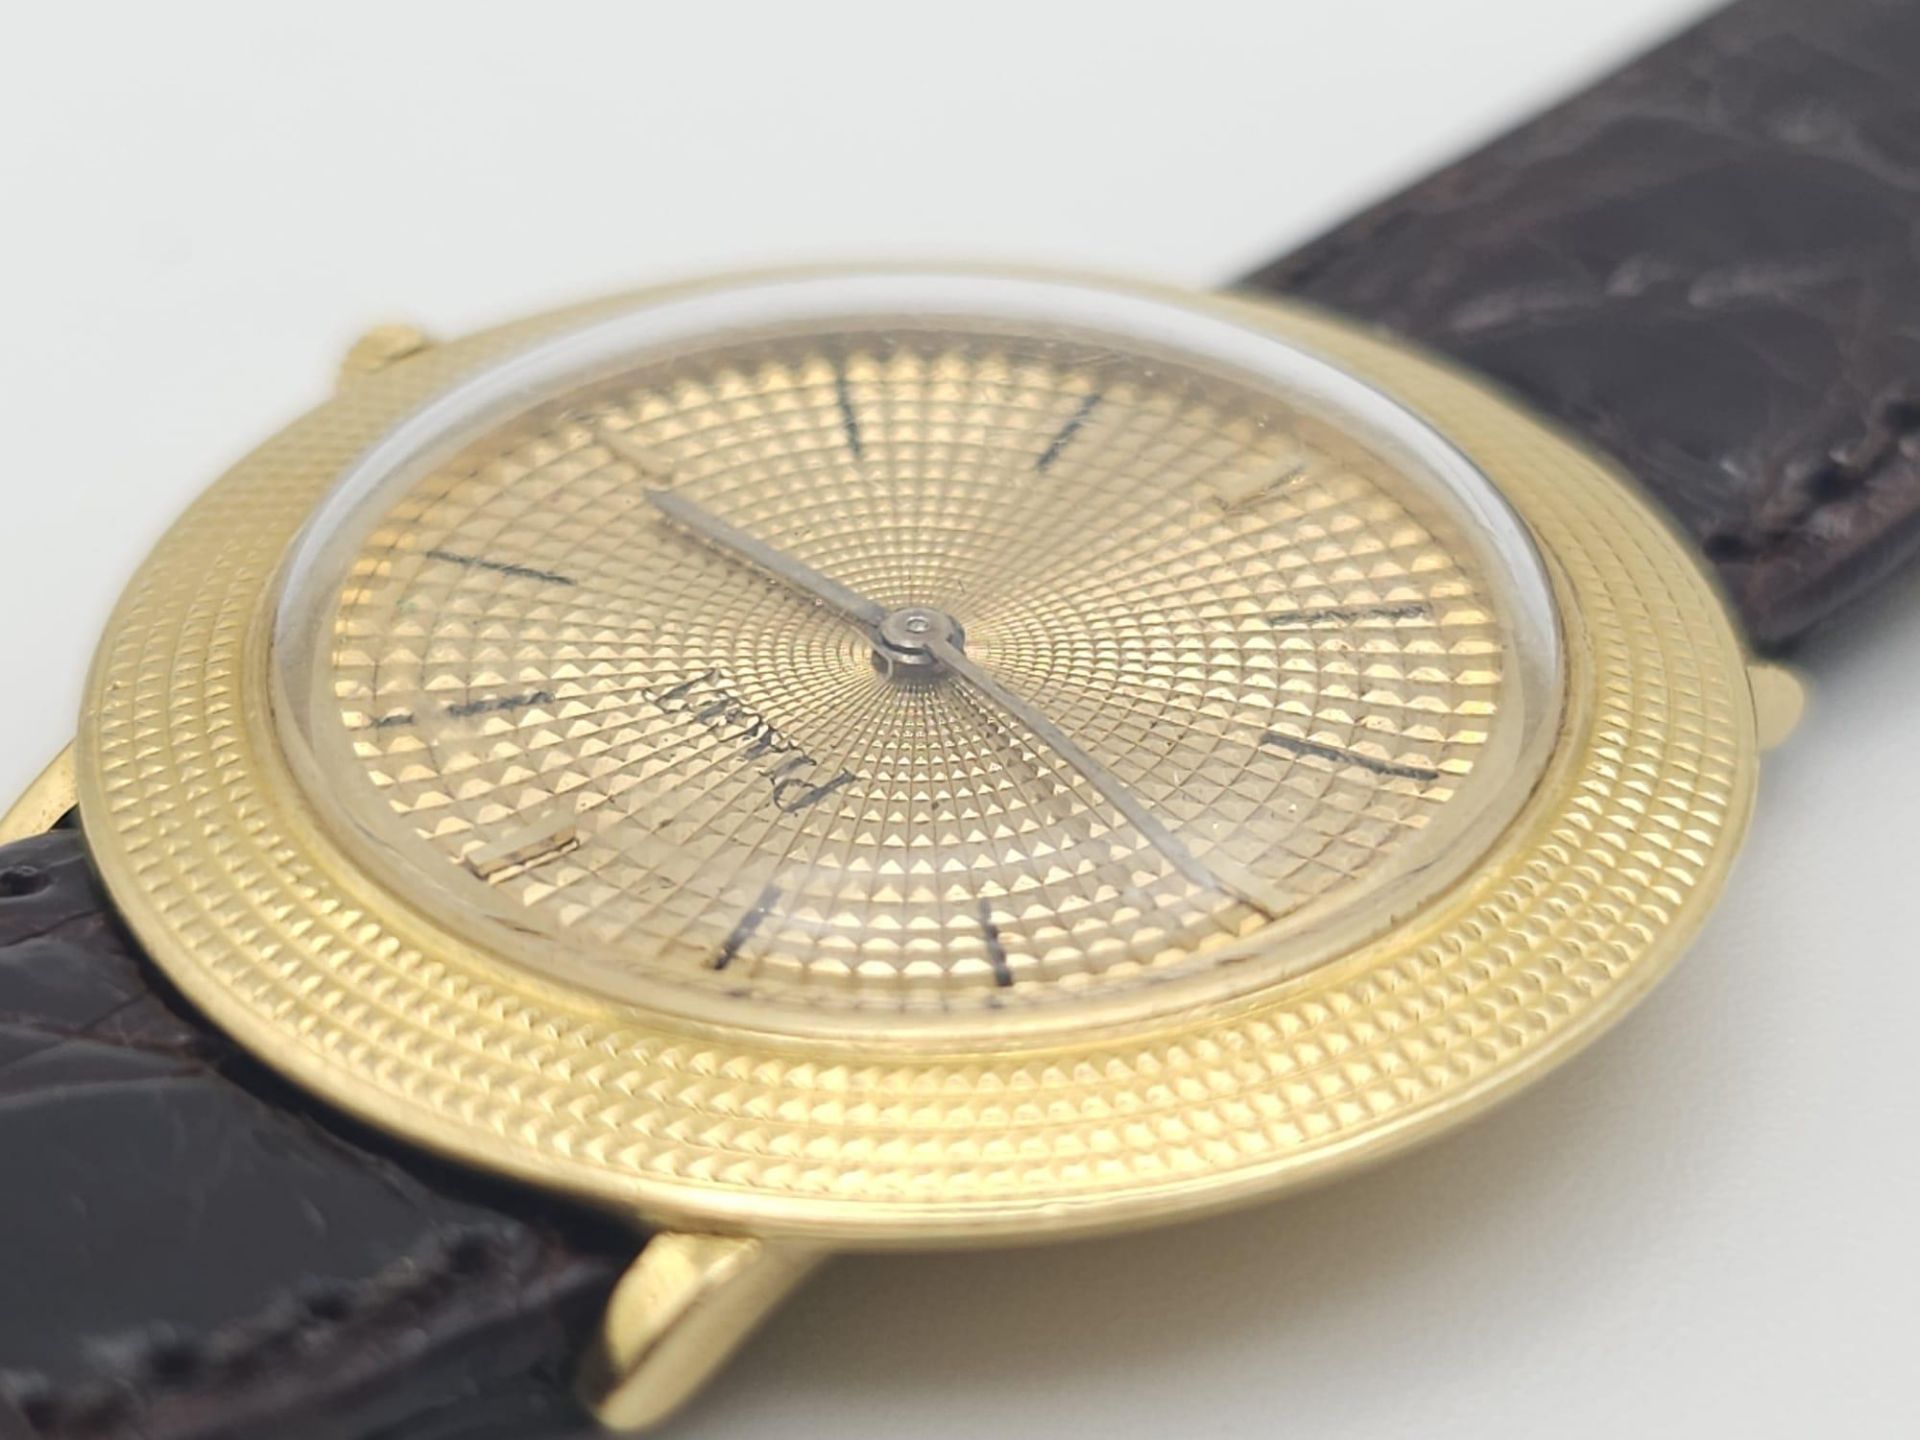 A Vintage 18K Gold Piaget Gents Watch with Hypnotic Dial. Brown crocodile strap. 18k gold case - - Image 12 of 25